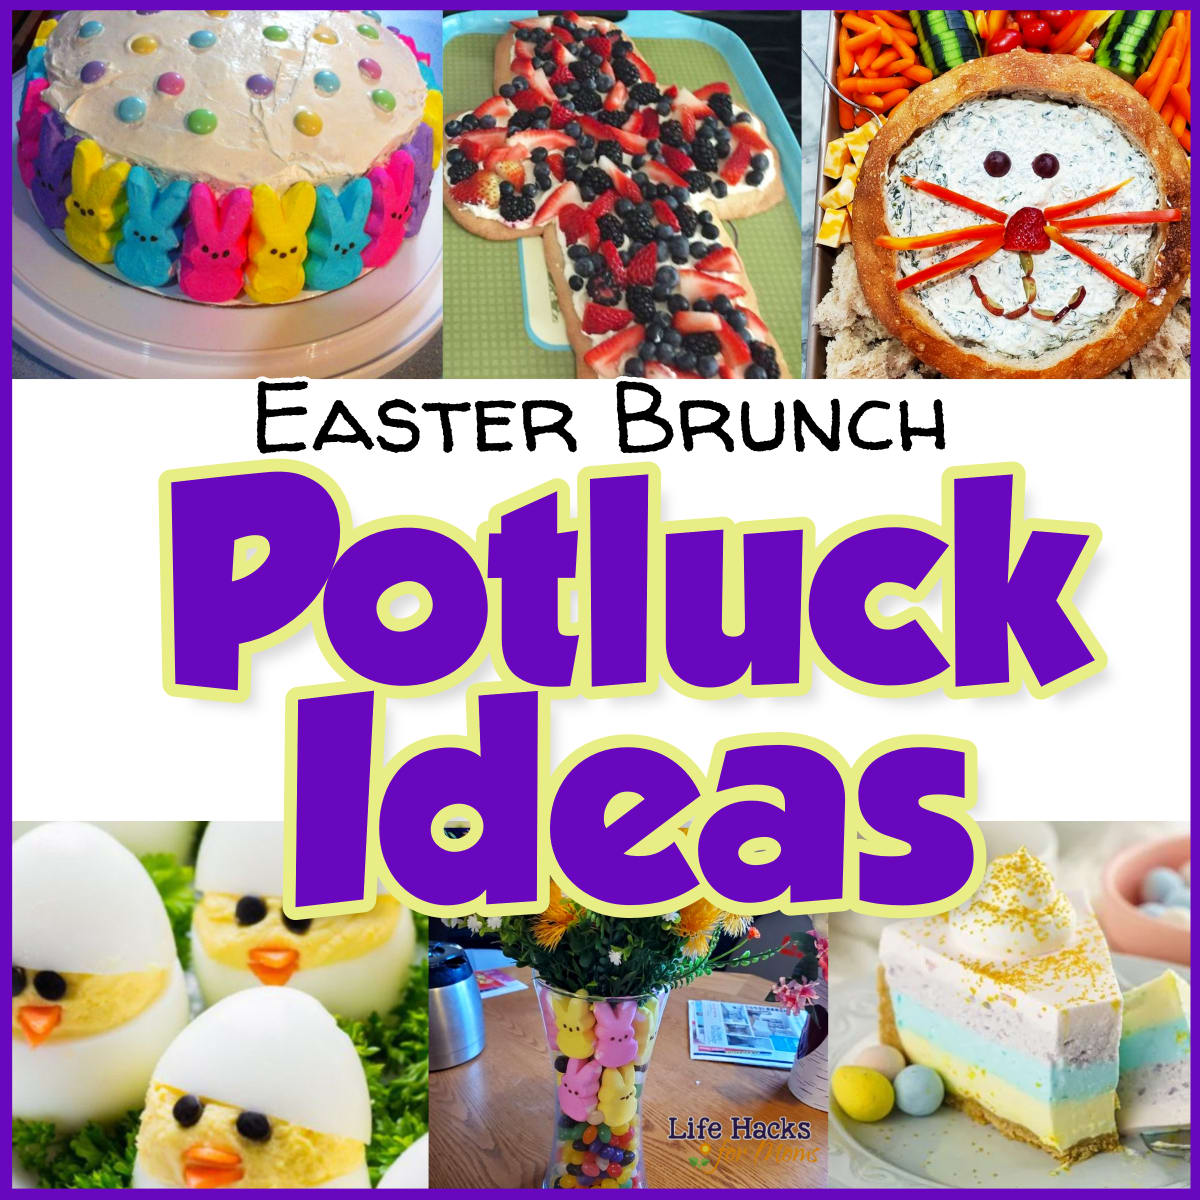 Easter Potluck Ideas For Church - having an Easter Brunch or Covered Dish Luncheon Buffet at your Church Service This Year? Here's some easy church potluck ideas for your Easter service crowd